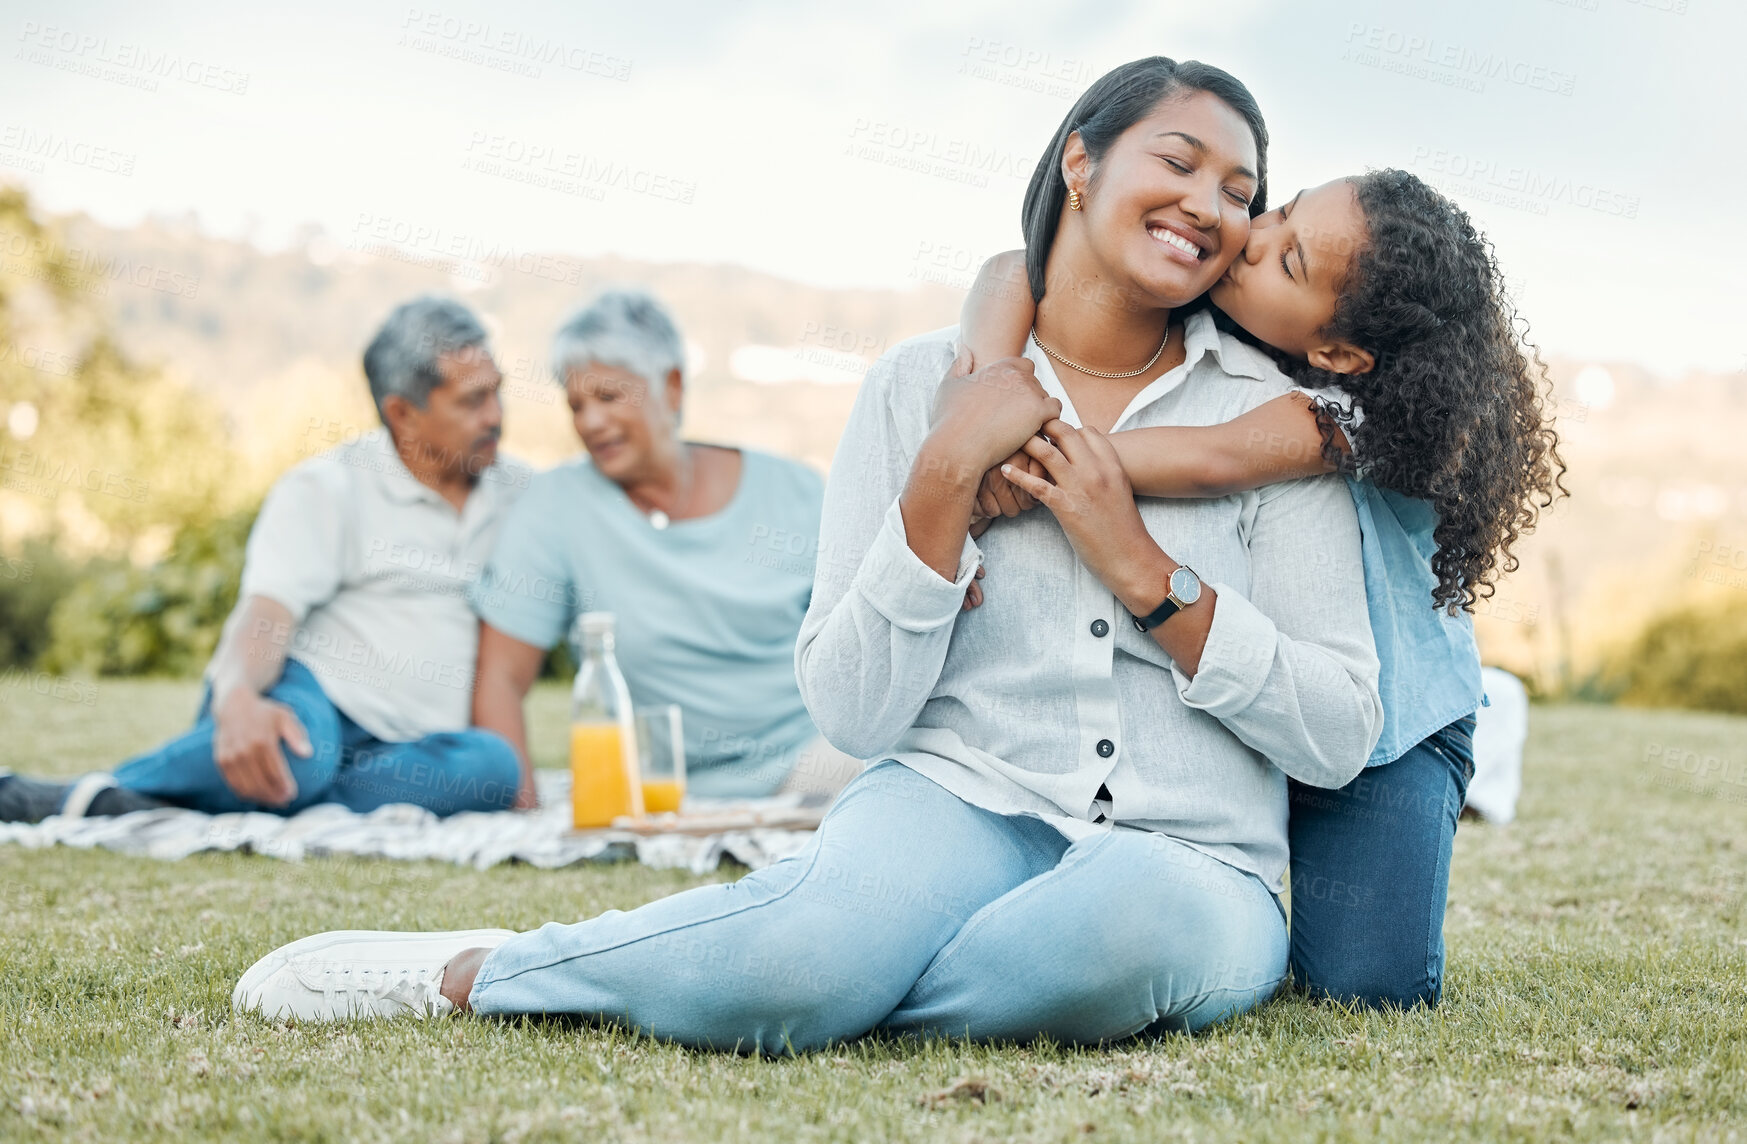 Buy stock photo Shot of a mother and daughter enjoying a day out at a picnic